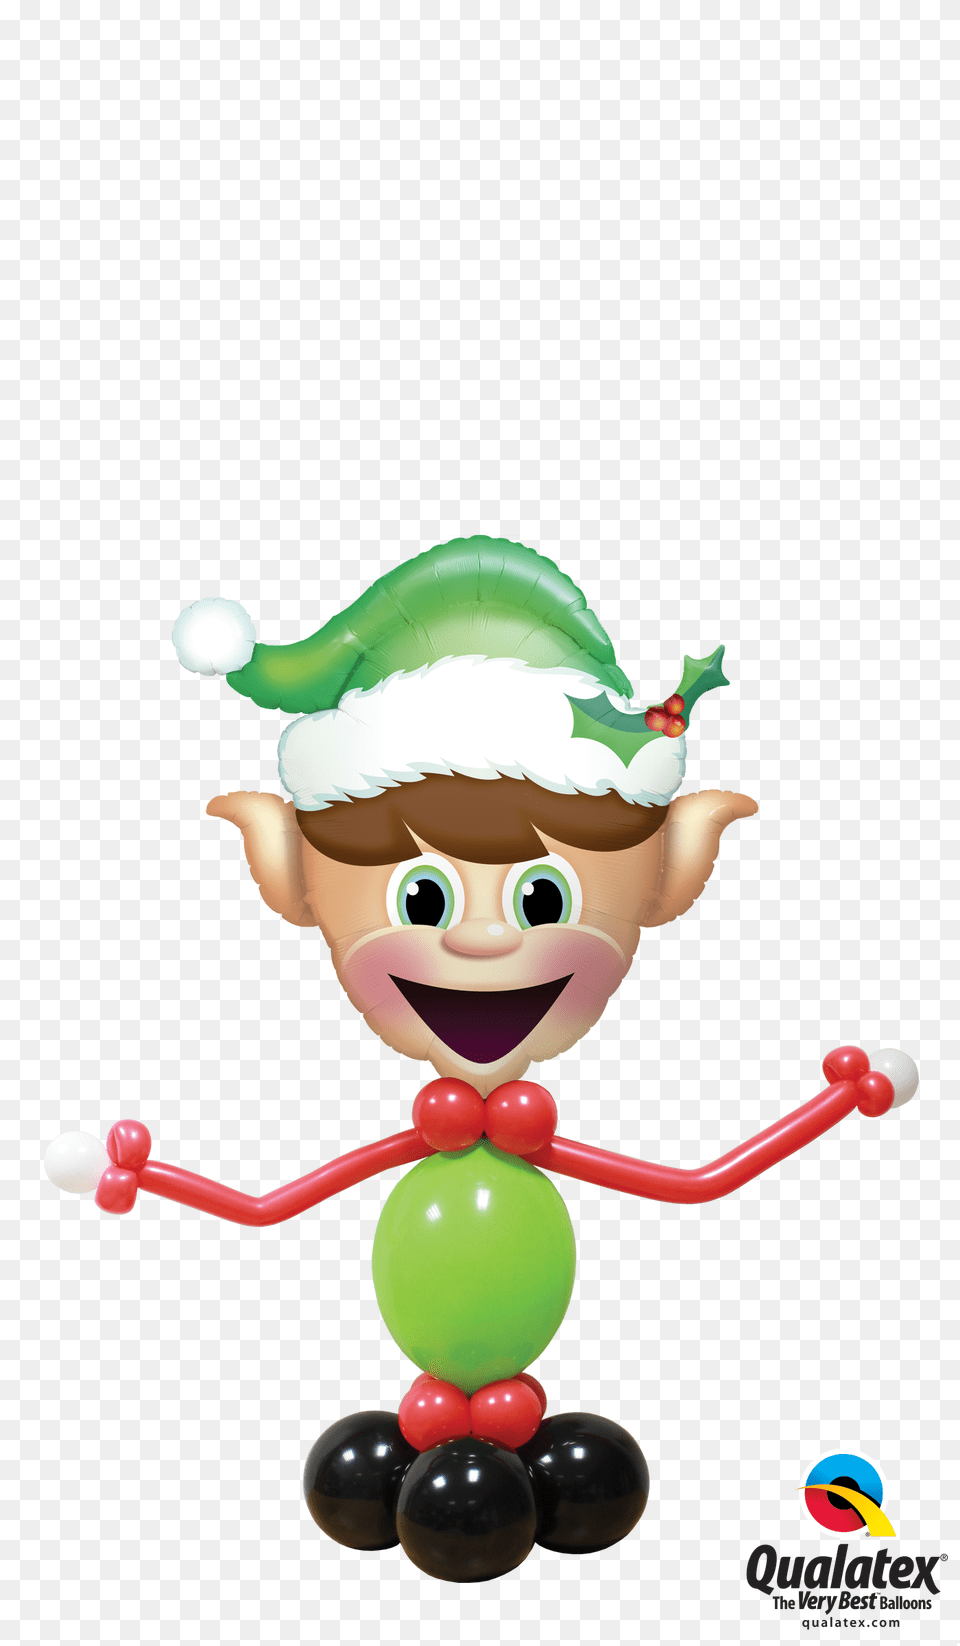 Qualatex Christmas Balloons Elf Supershape Balloon, Baby, Person Free Png Download